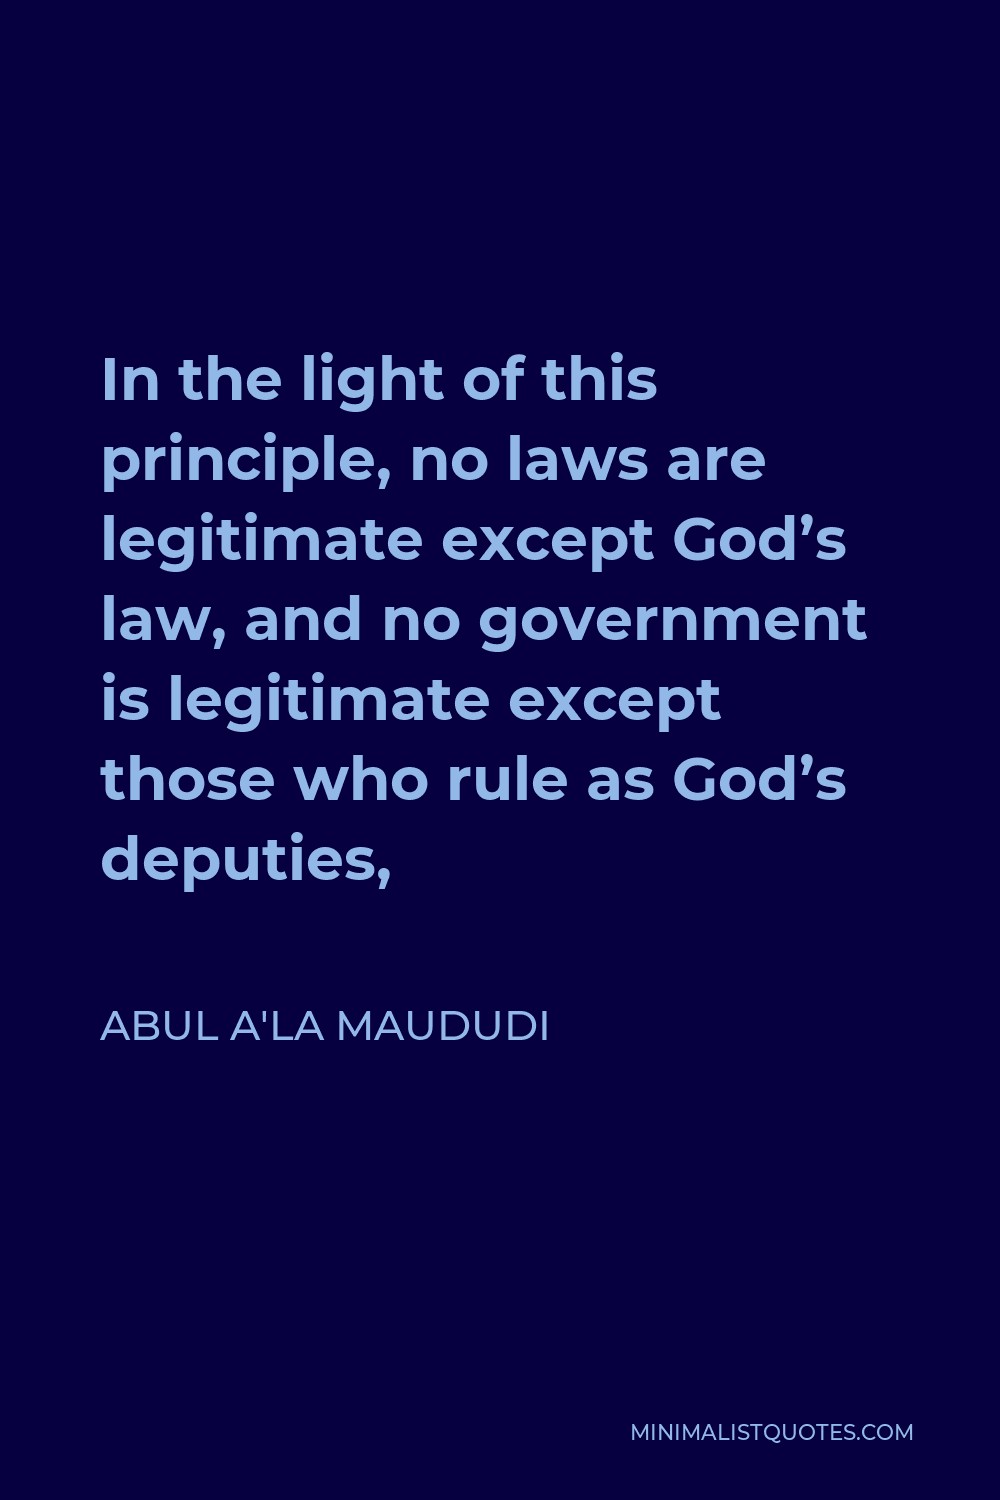 Abul A'la Maududi Quote - In the light of this principle, no laws are legitimate except God’s law, and no government is legitimate except those who rule as God’s deputies,